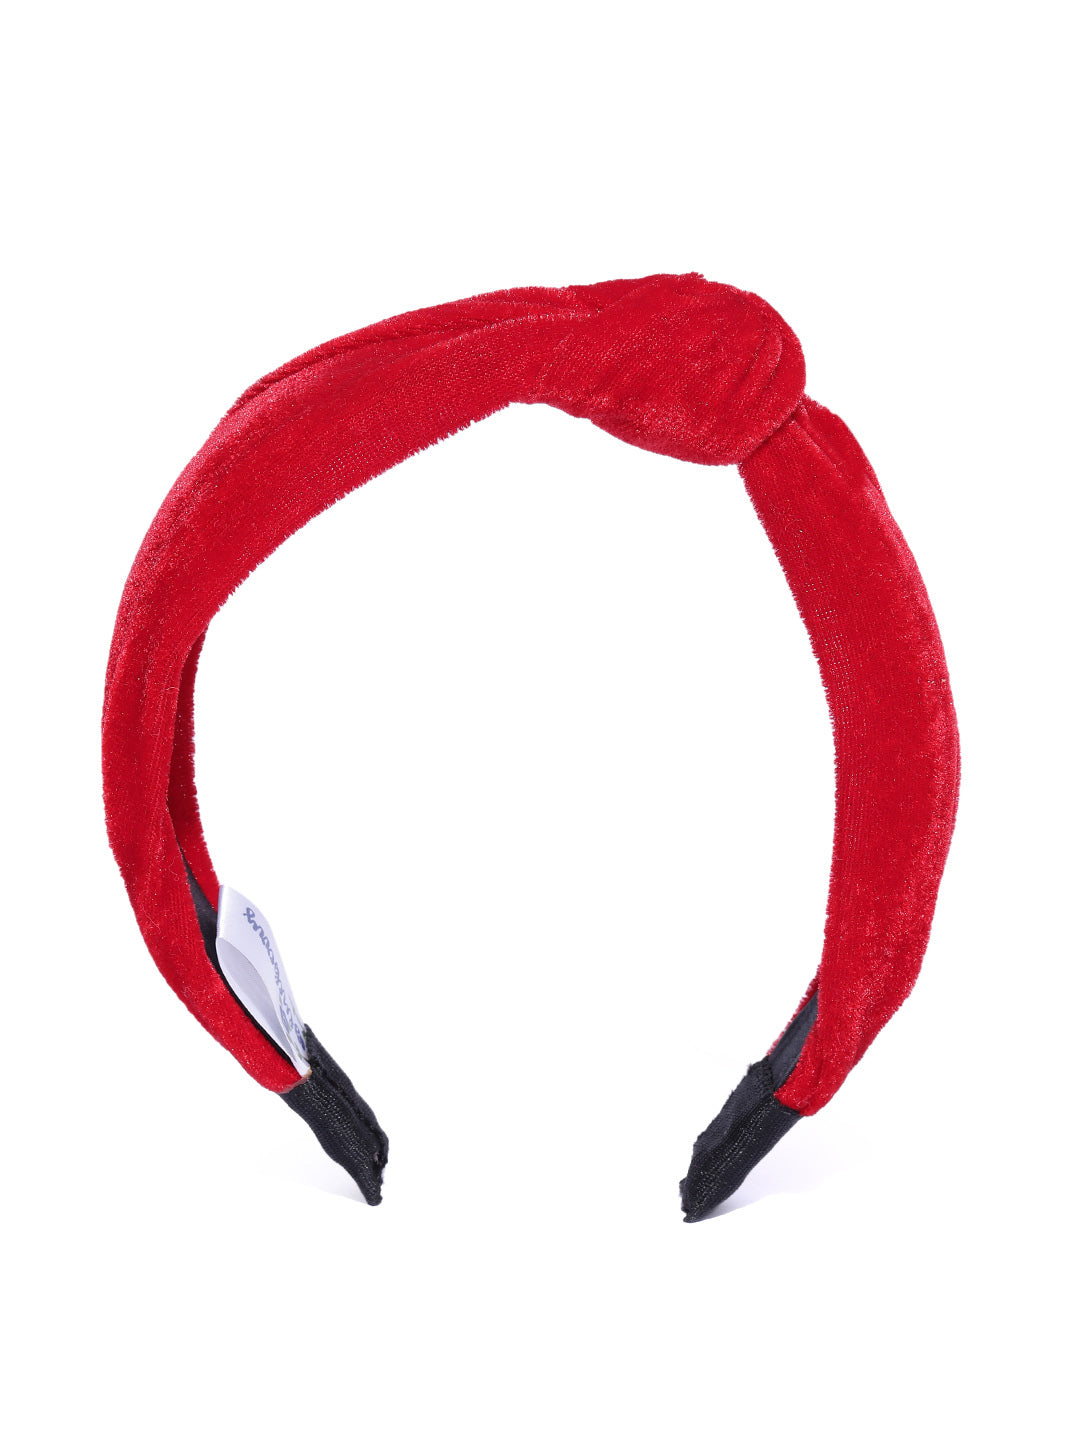 Blueberry red velevt knot hair band